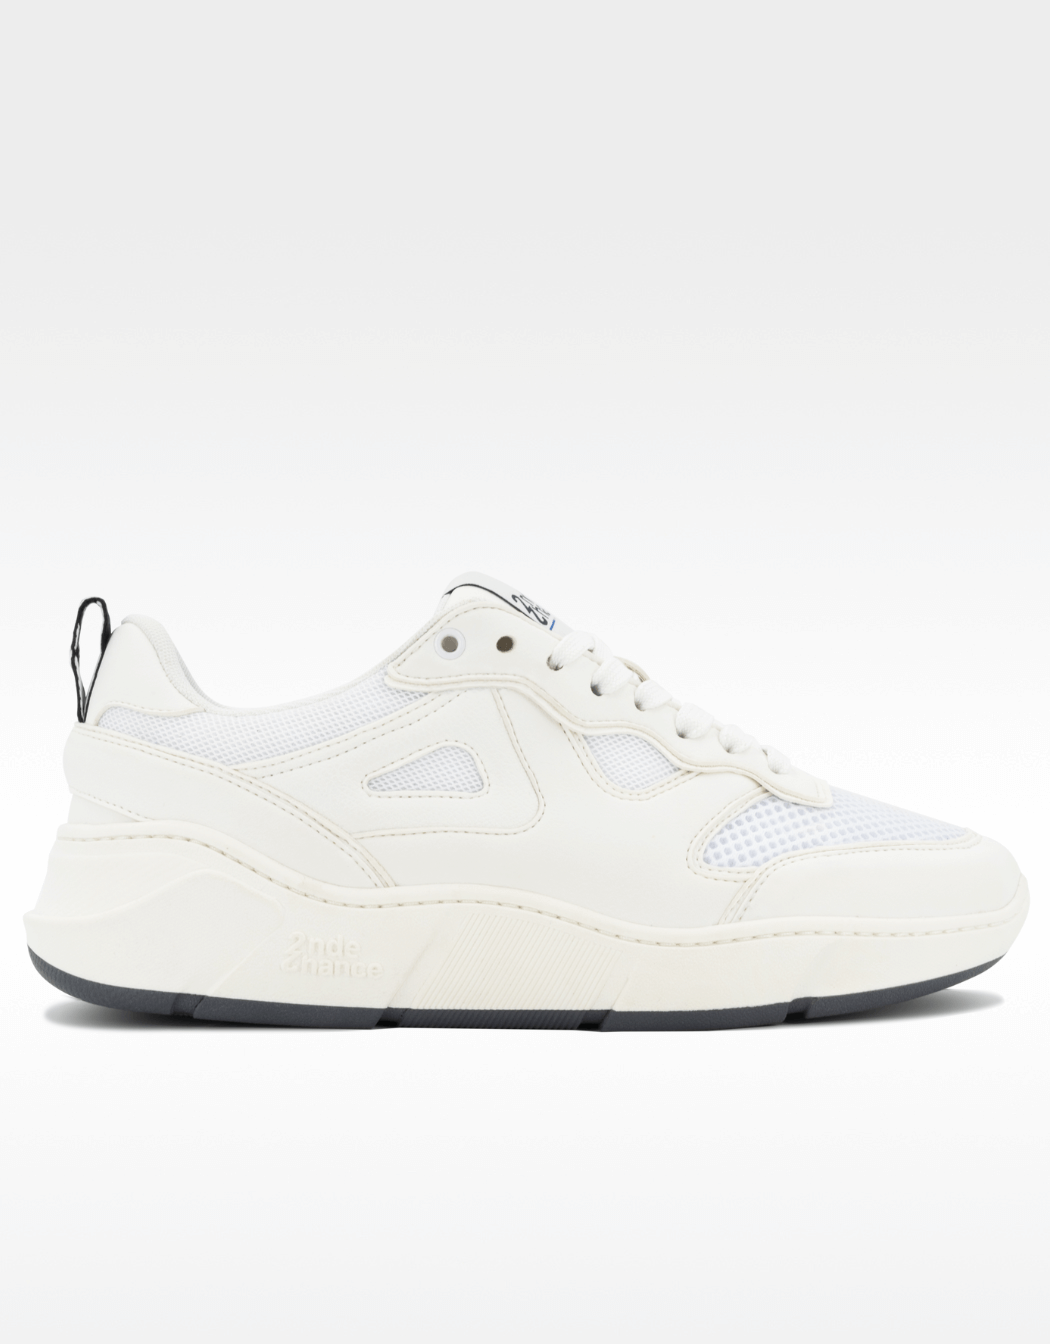 sneakers-neo-loopr3-2ndechance-white-recyclees-recyclable-madeinfrance-ambiance-cote